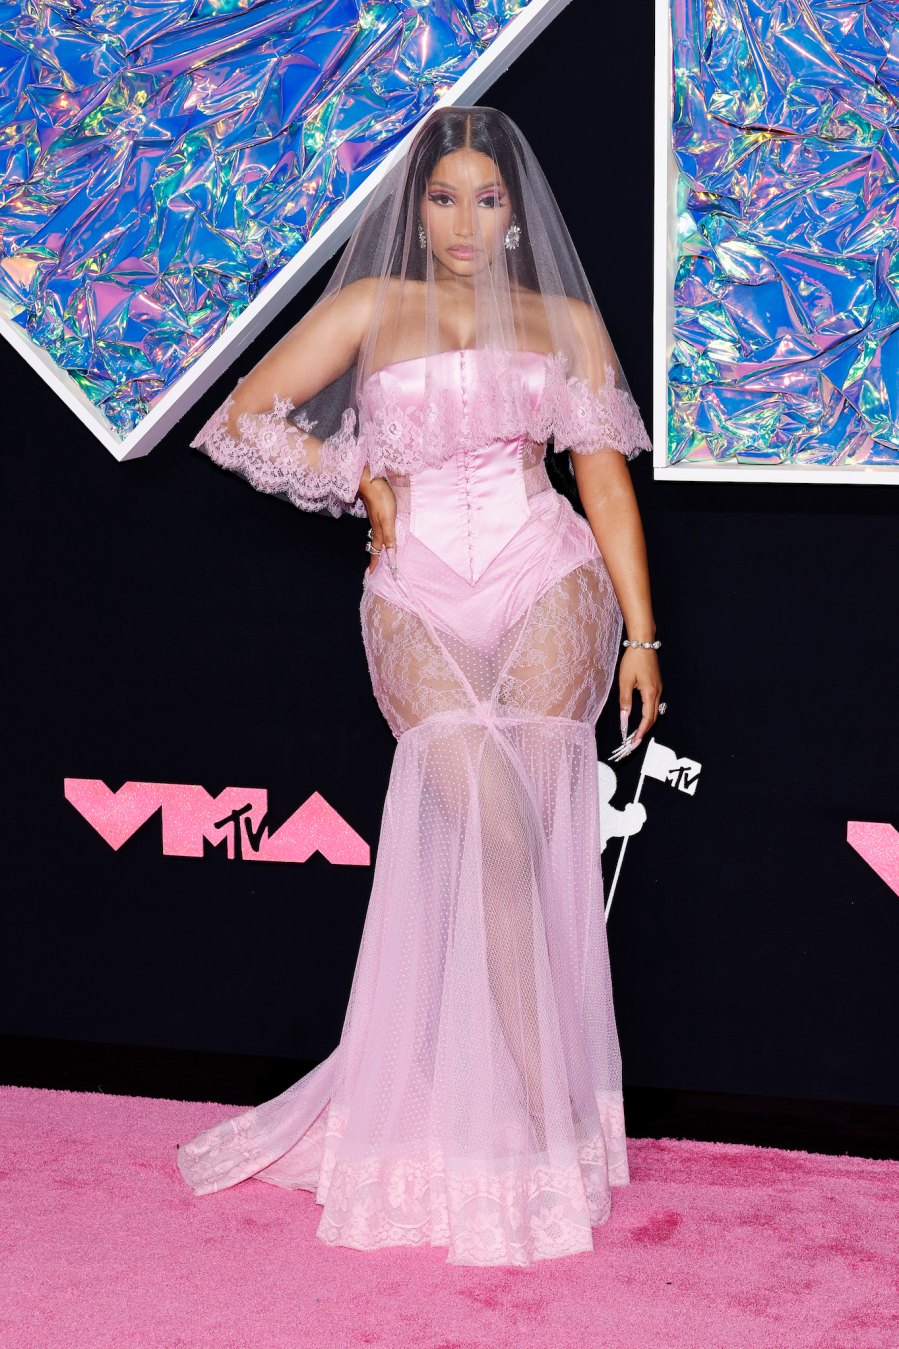 -FEATURE- Nicki Minaj Is a Barbie Bride in Lacey Gown at the 2023 MTV Video Music Awards